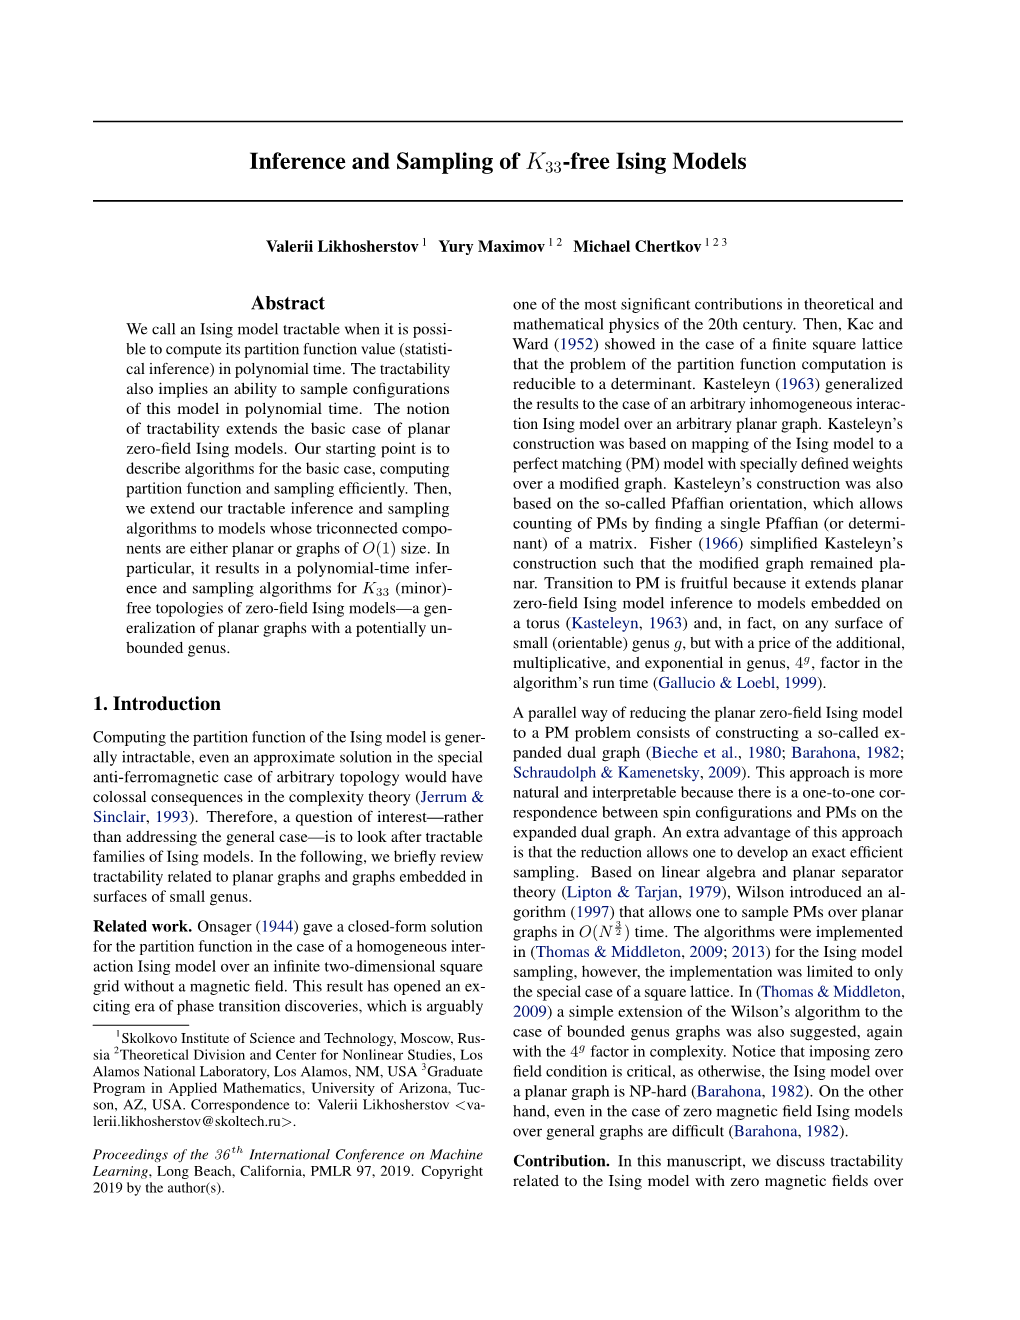 Inference and Sampling of K33-Free Ising Models